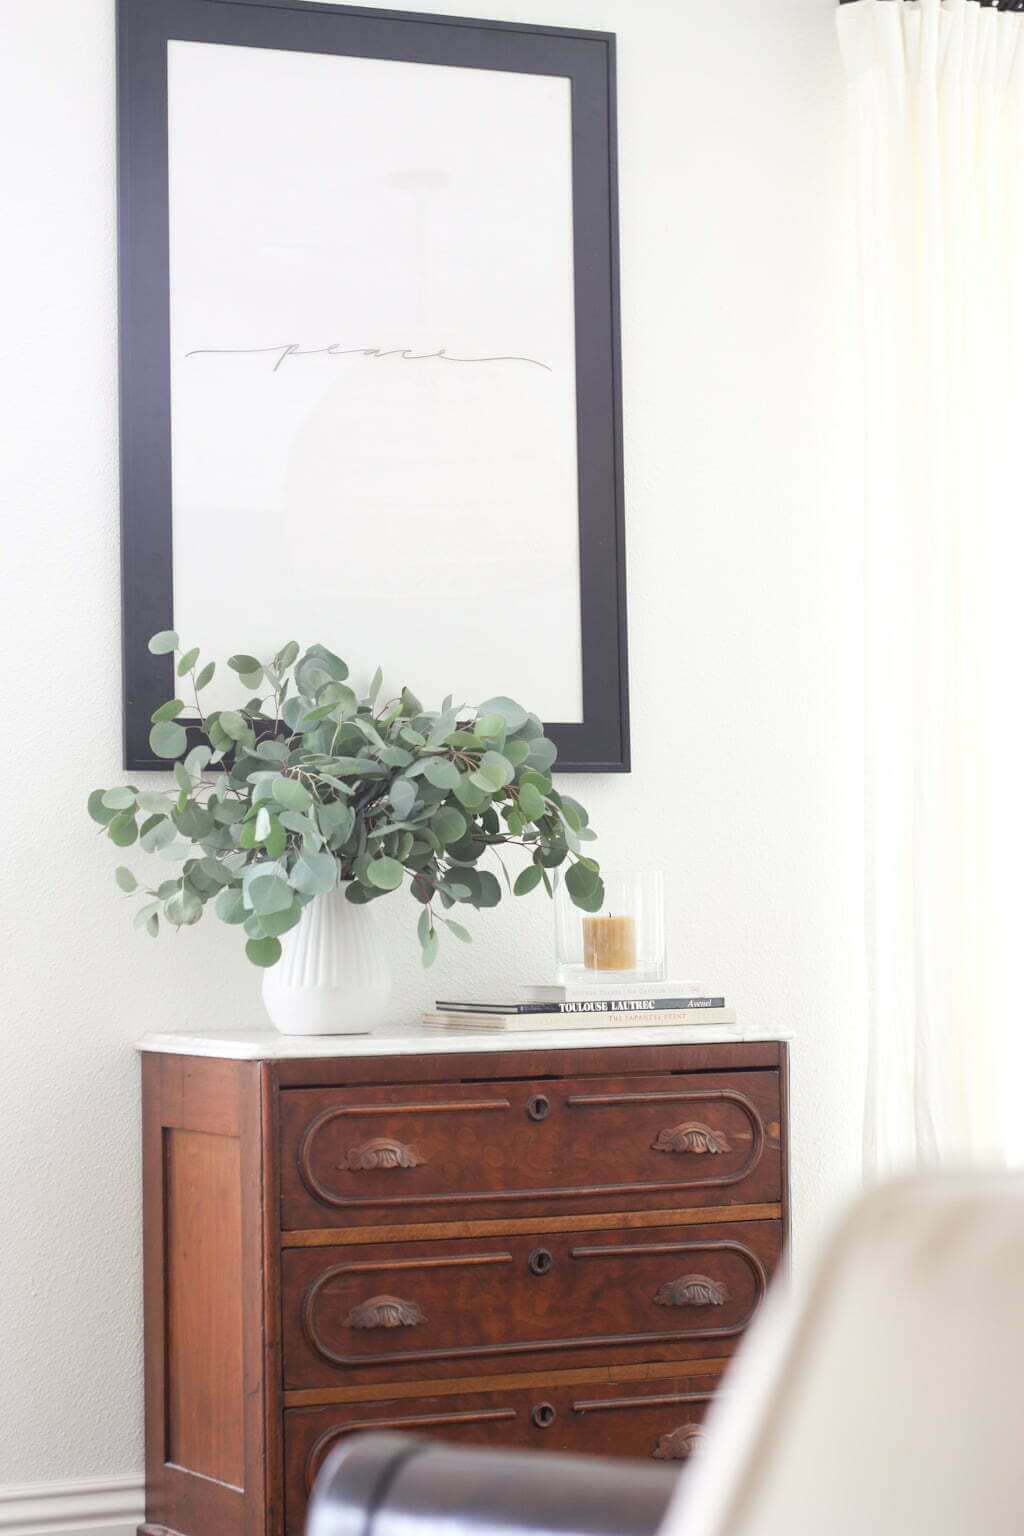 antique dresser with eucalyptus and candle on top